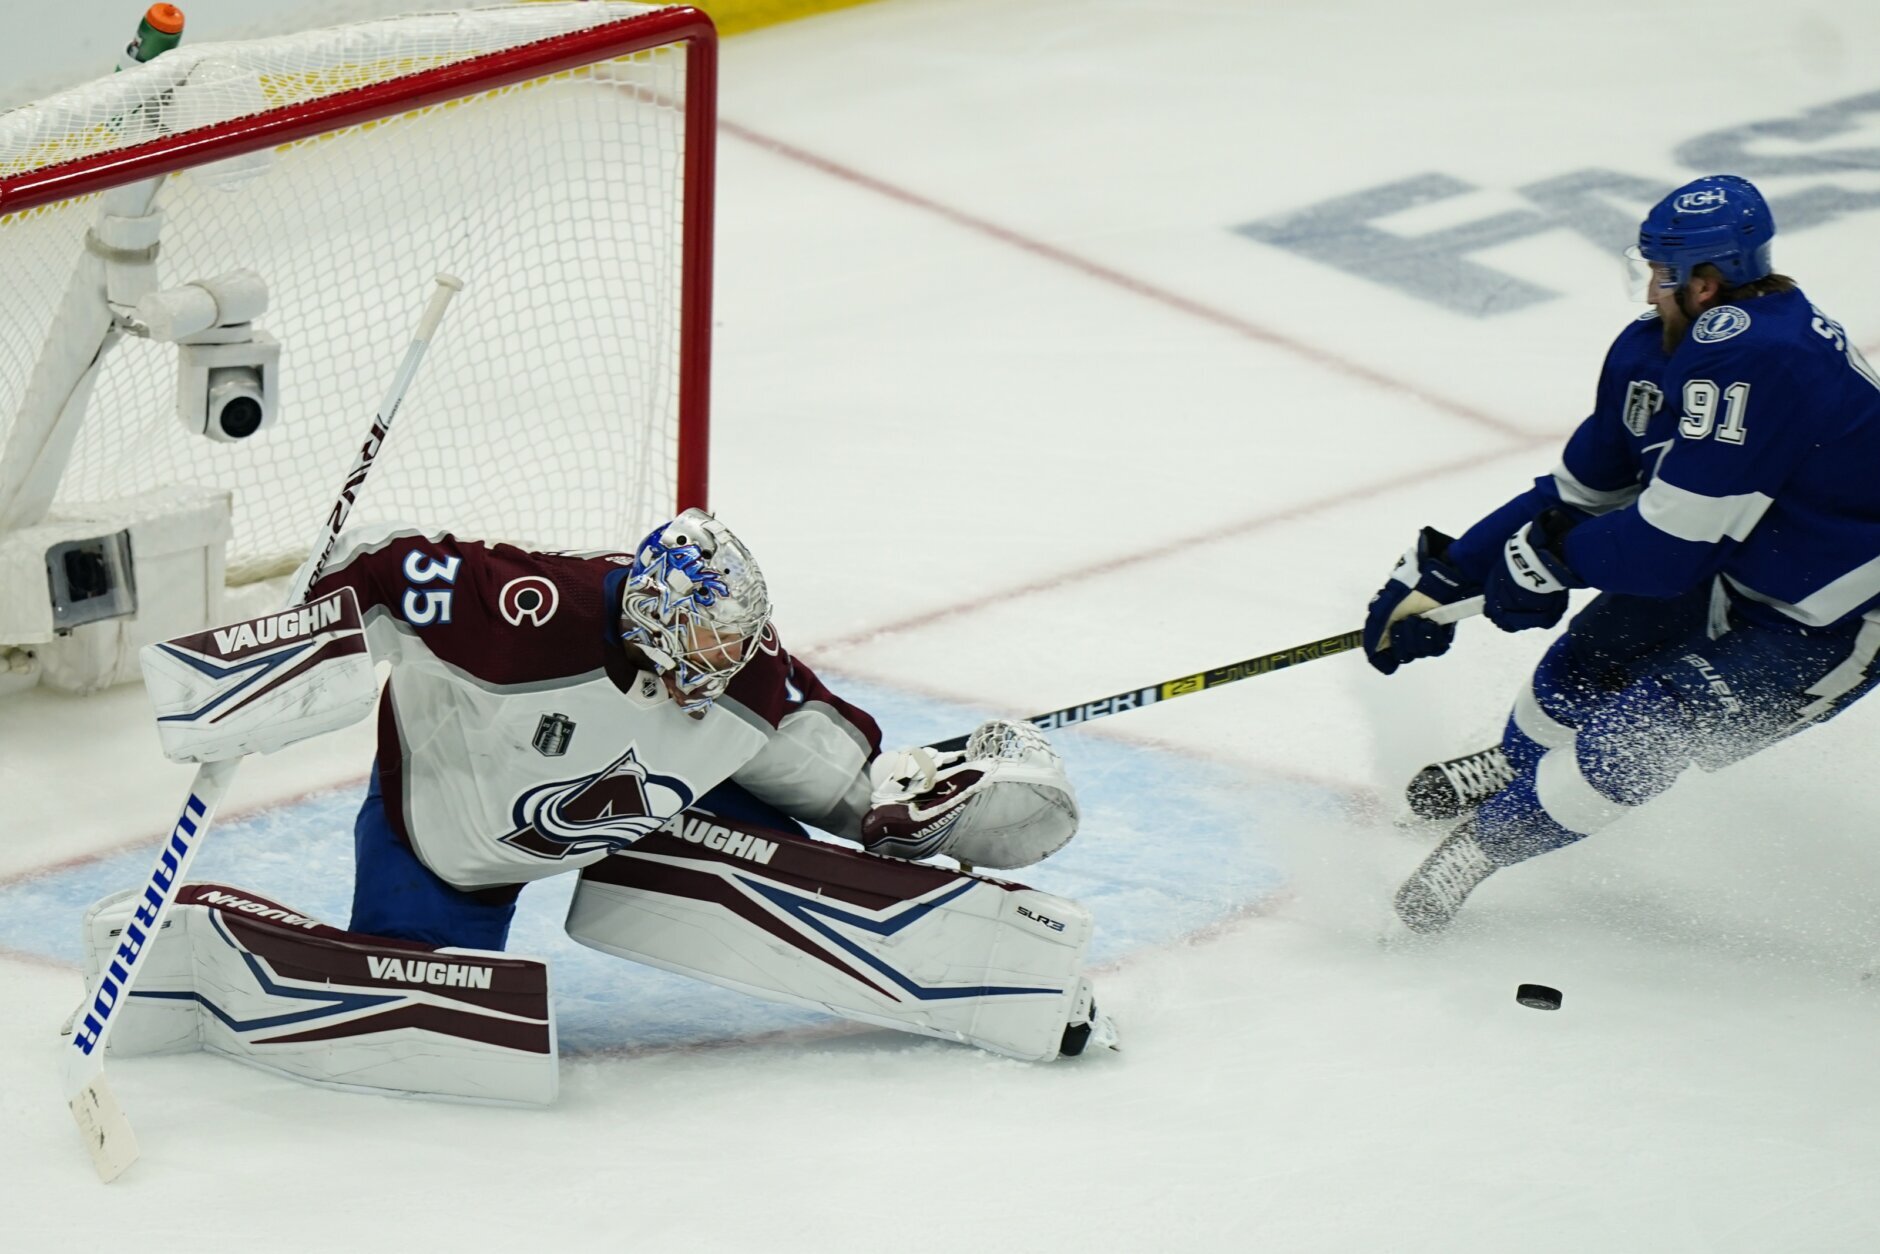 https://wtop.com/wp-content/uploads/2022/06/Stanley_Cup_Avalanche_Lightning_Hockey_74280-1880x1254.jpg